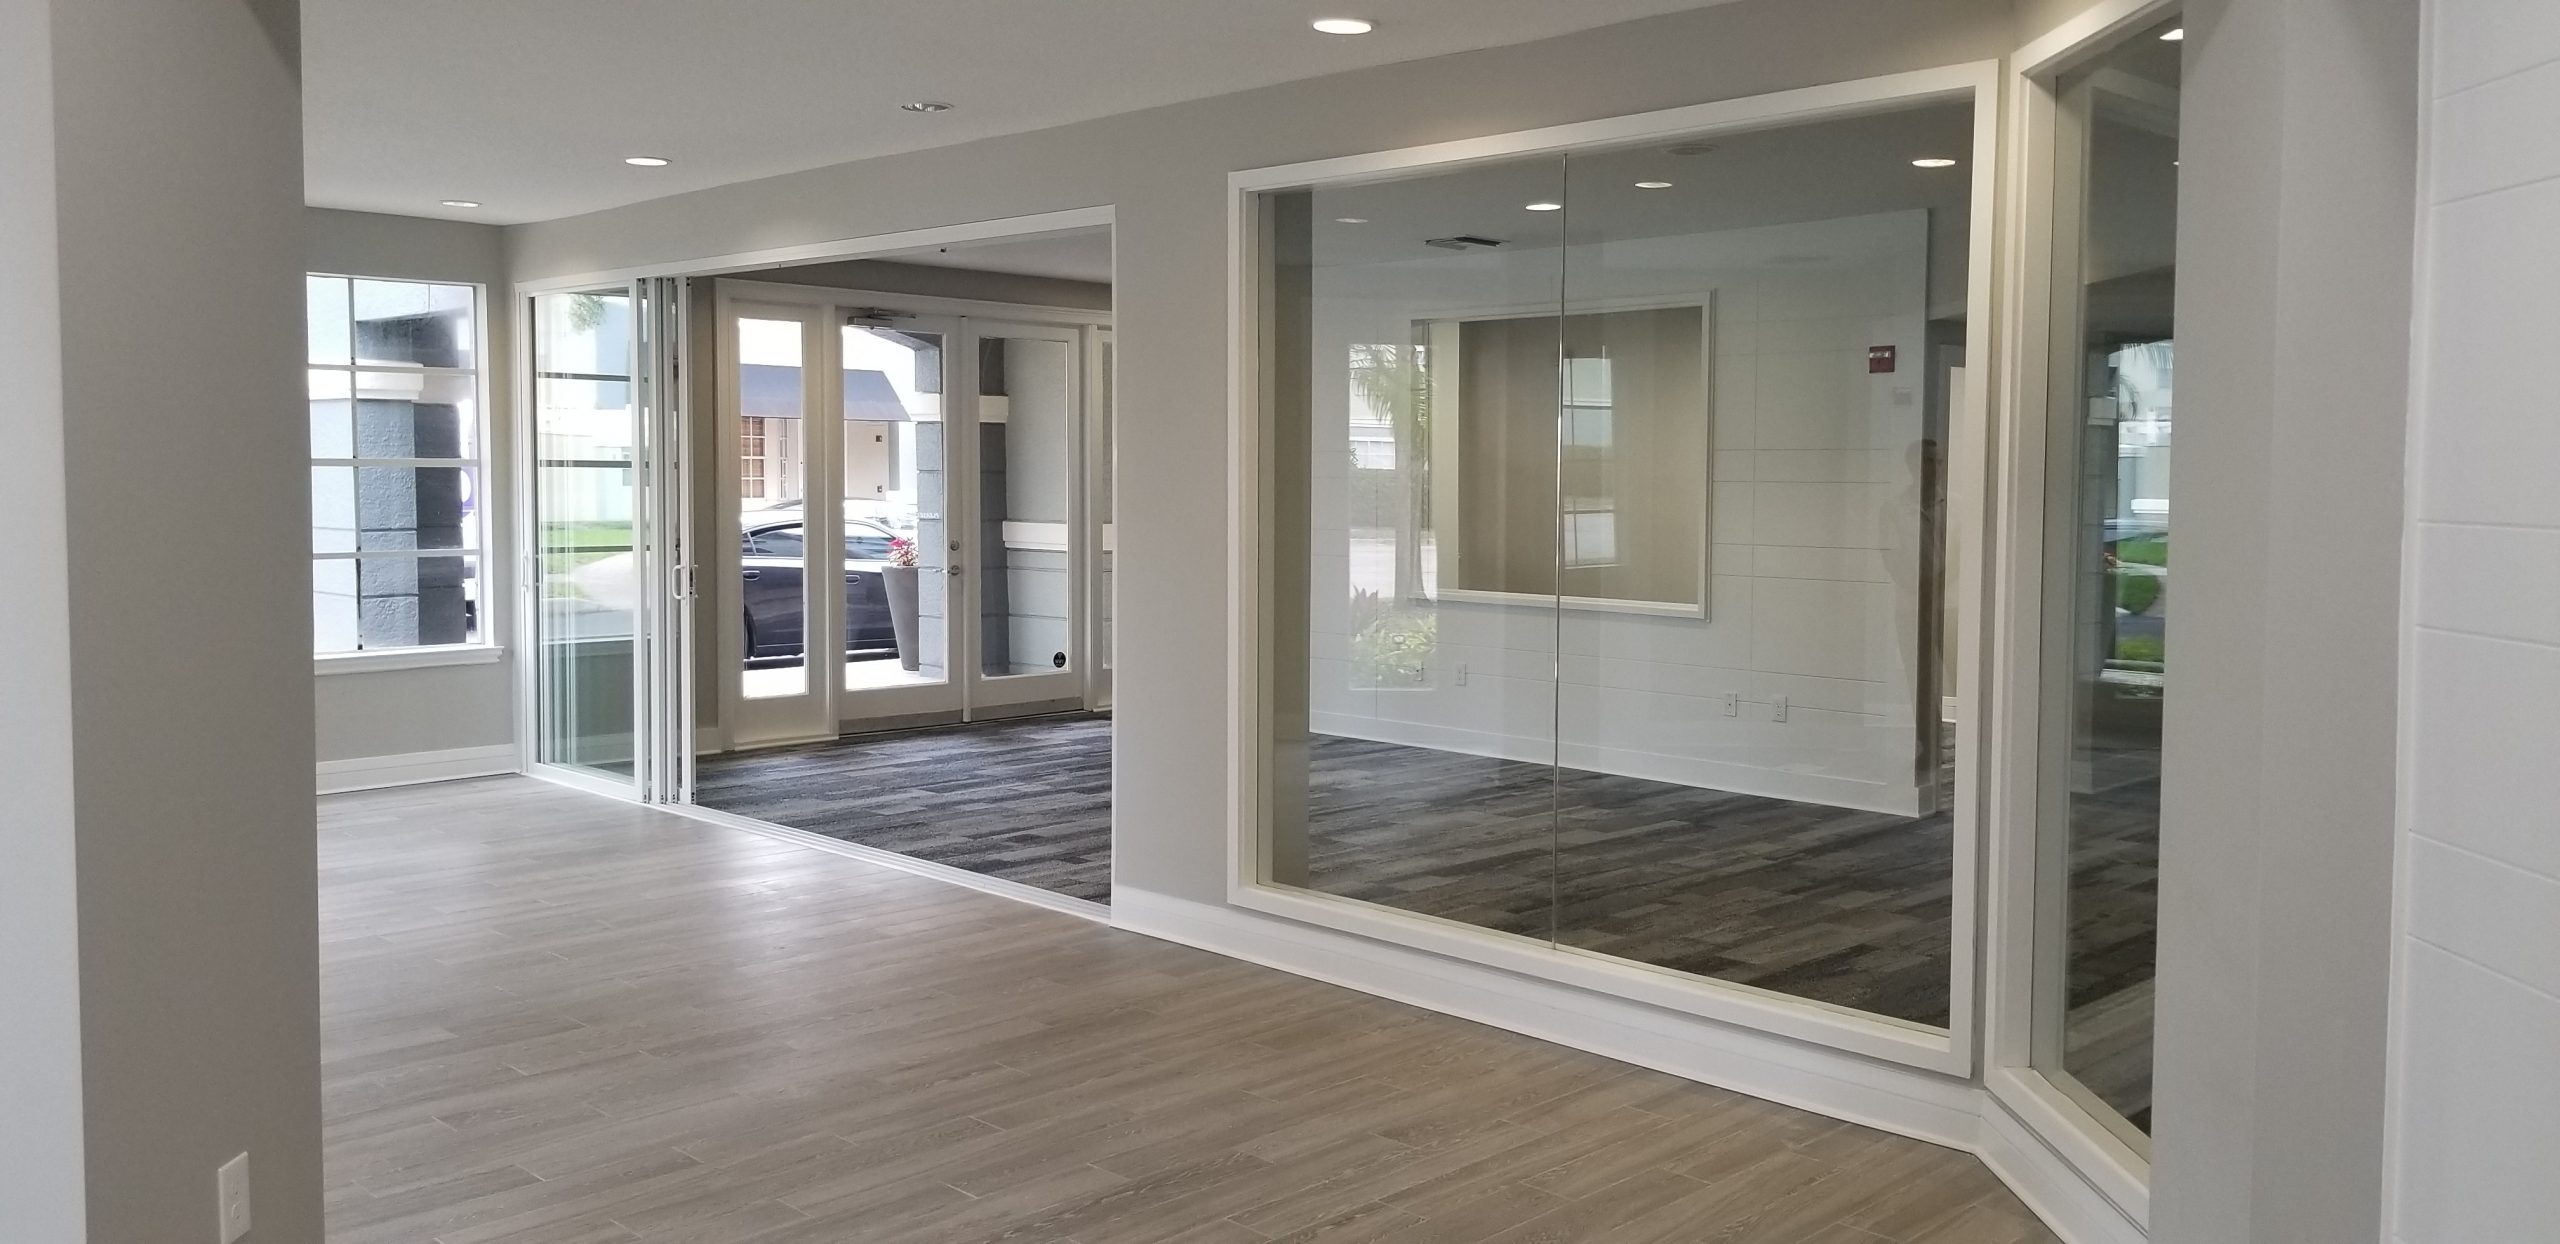 Arbors at Carrollwood Apartments - Wall Design and Mirrors